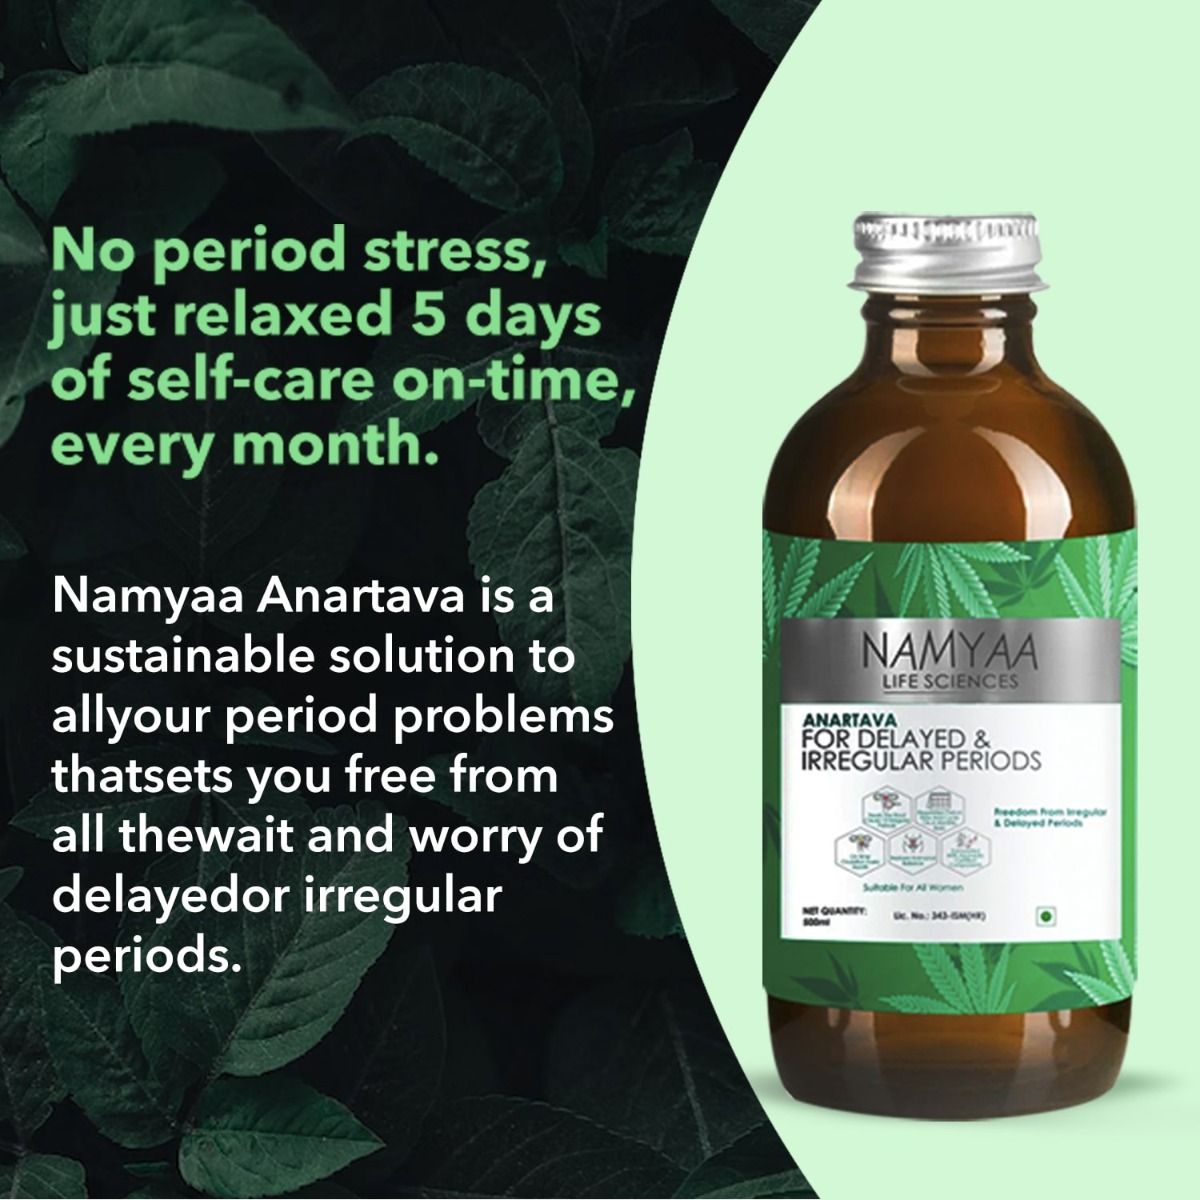 Namyaa Anartava for Delayed & Irregular Periods Syrup, 500 ml, Pack of 1 